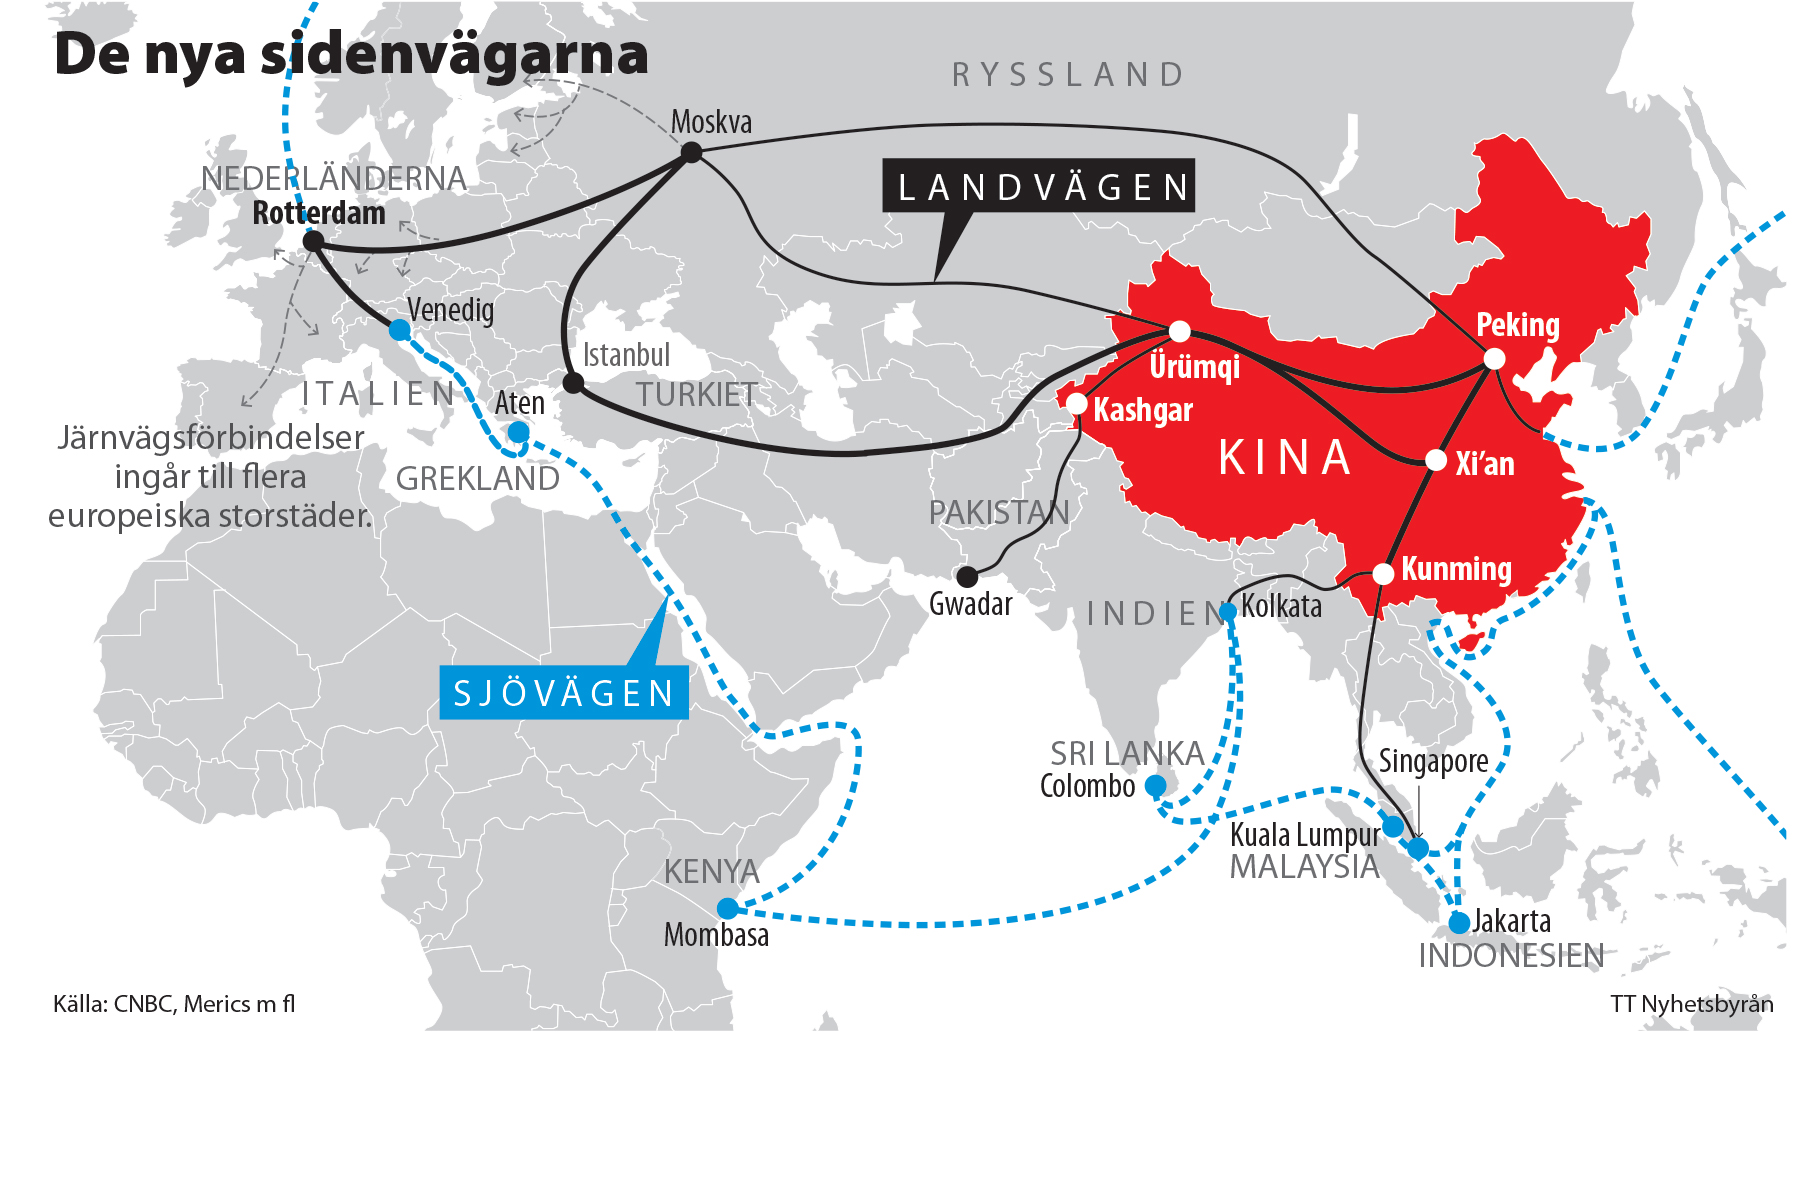 New communications project on China’s global “Belt and Road Initiative”